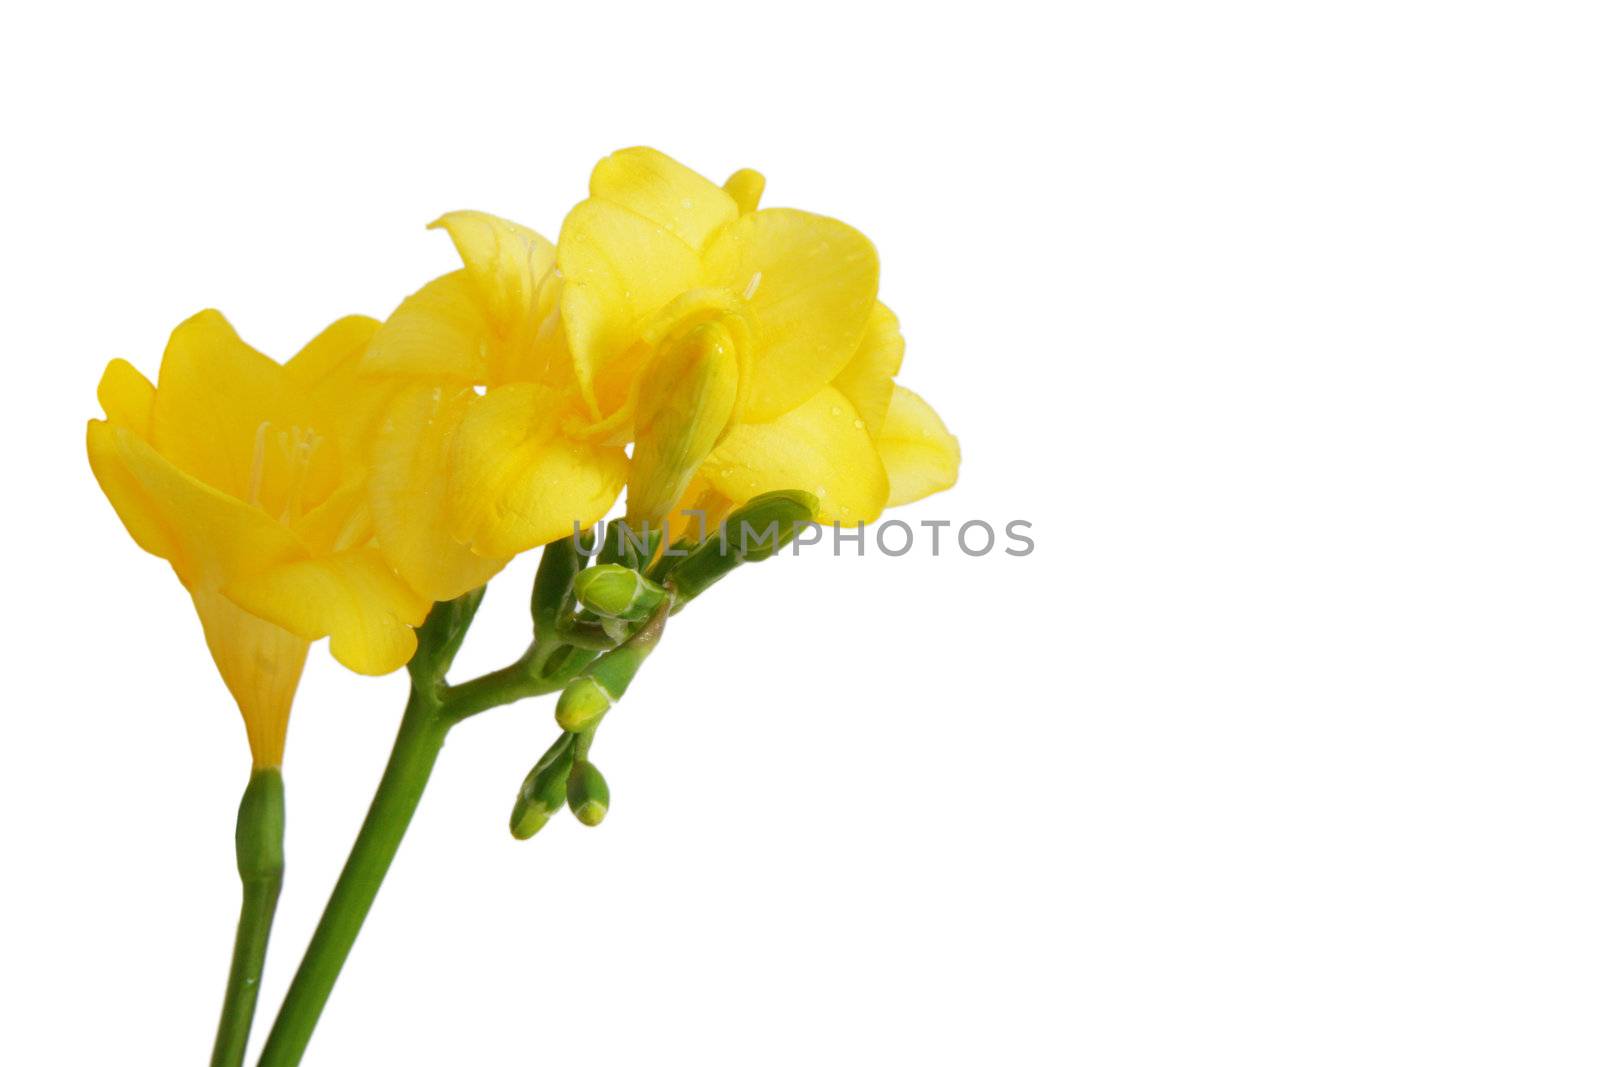 a bunch of yellow freesia on a light background